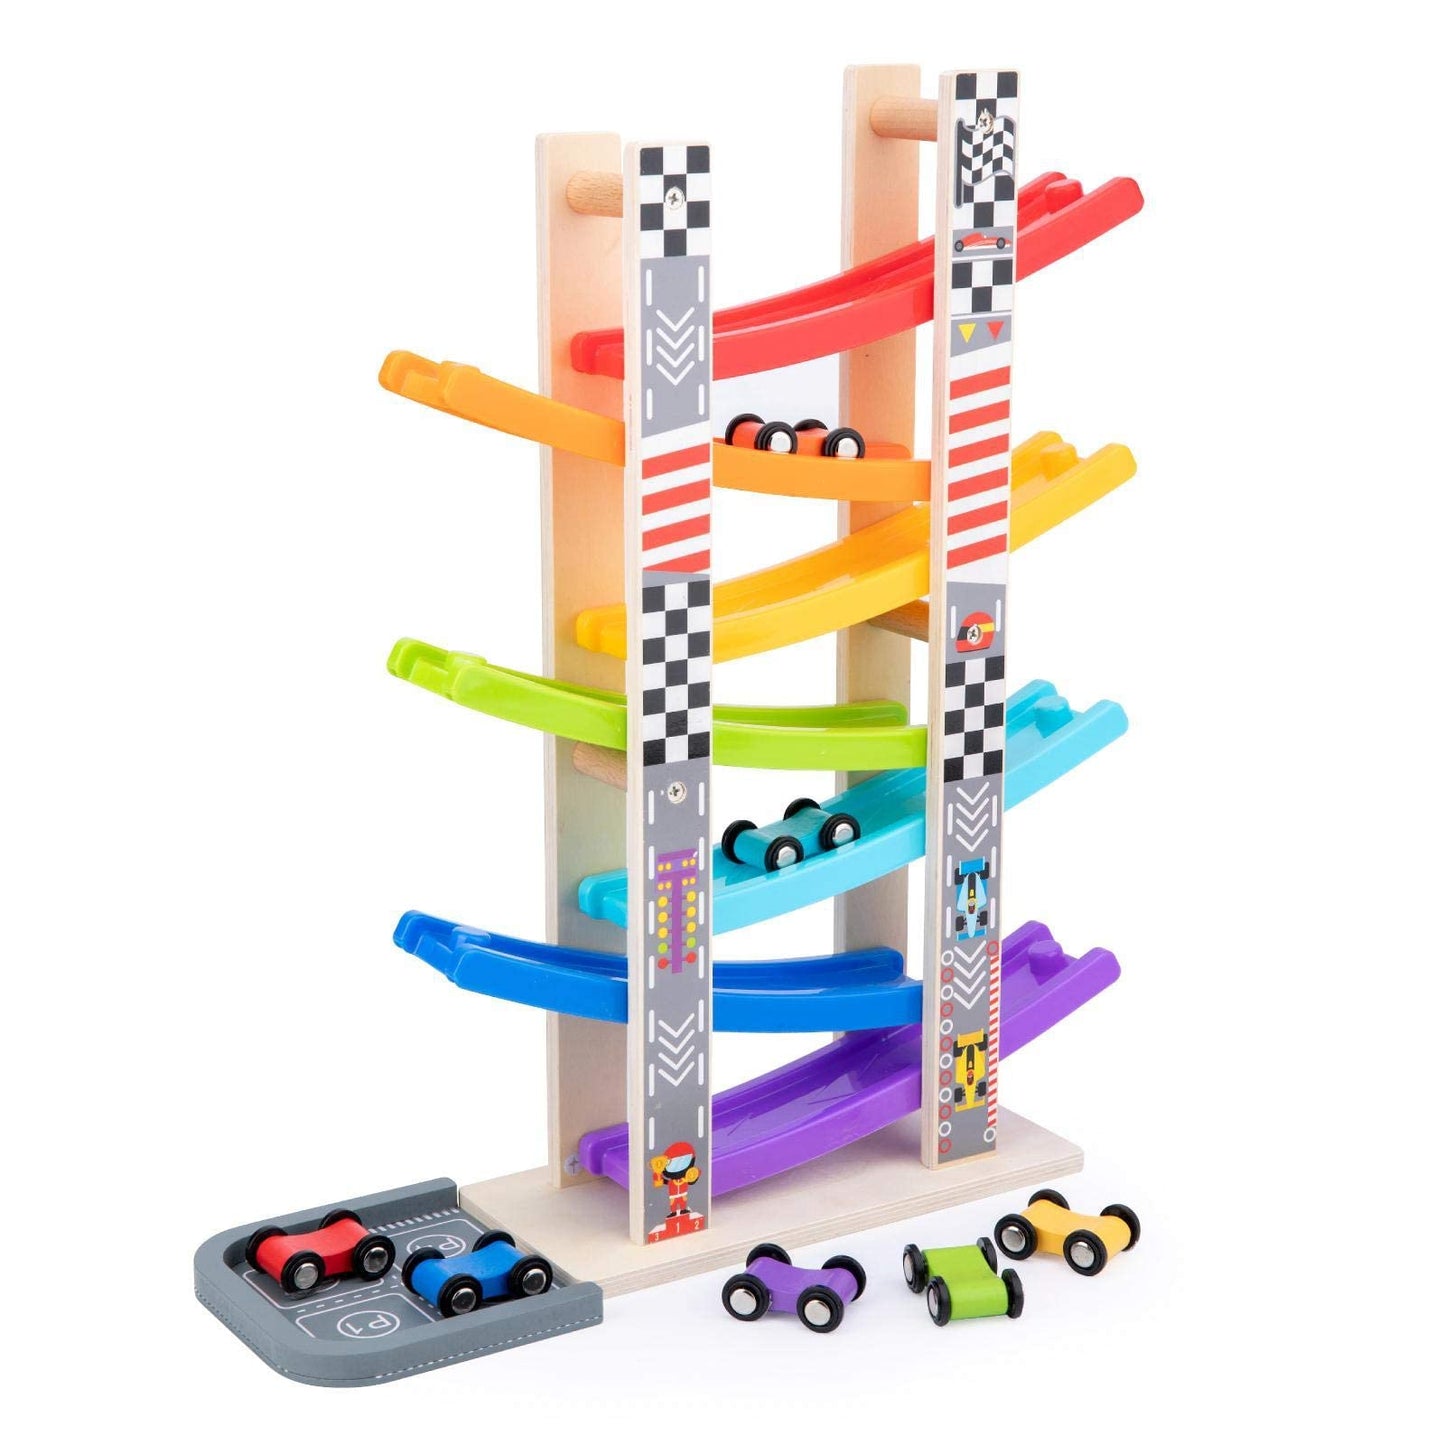 WOOD CITY Toddler Toys for 1 2 3 Years Old, Wooden Car Ramp Racer Toy Vehicle Set with 7 Mini Cars & Race Tracks, Montessori Toys for Toddlers Boys